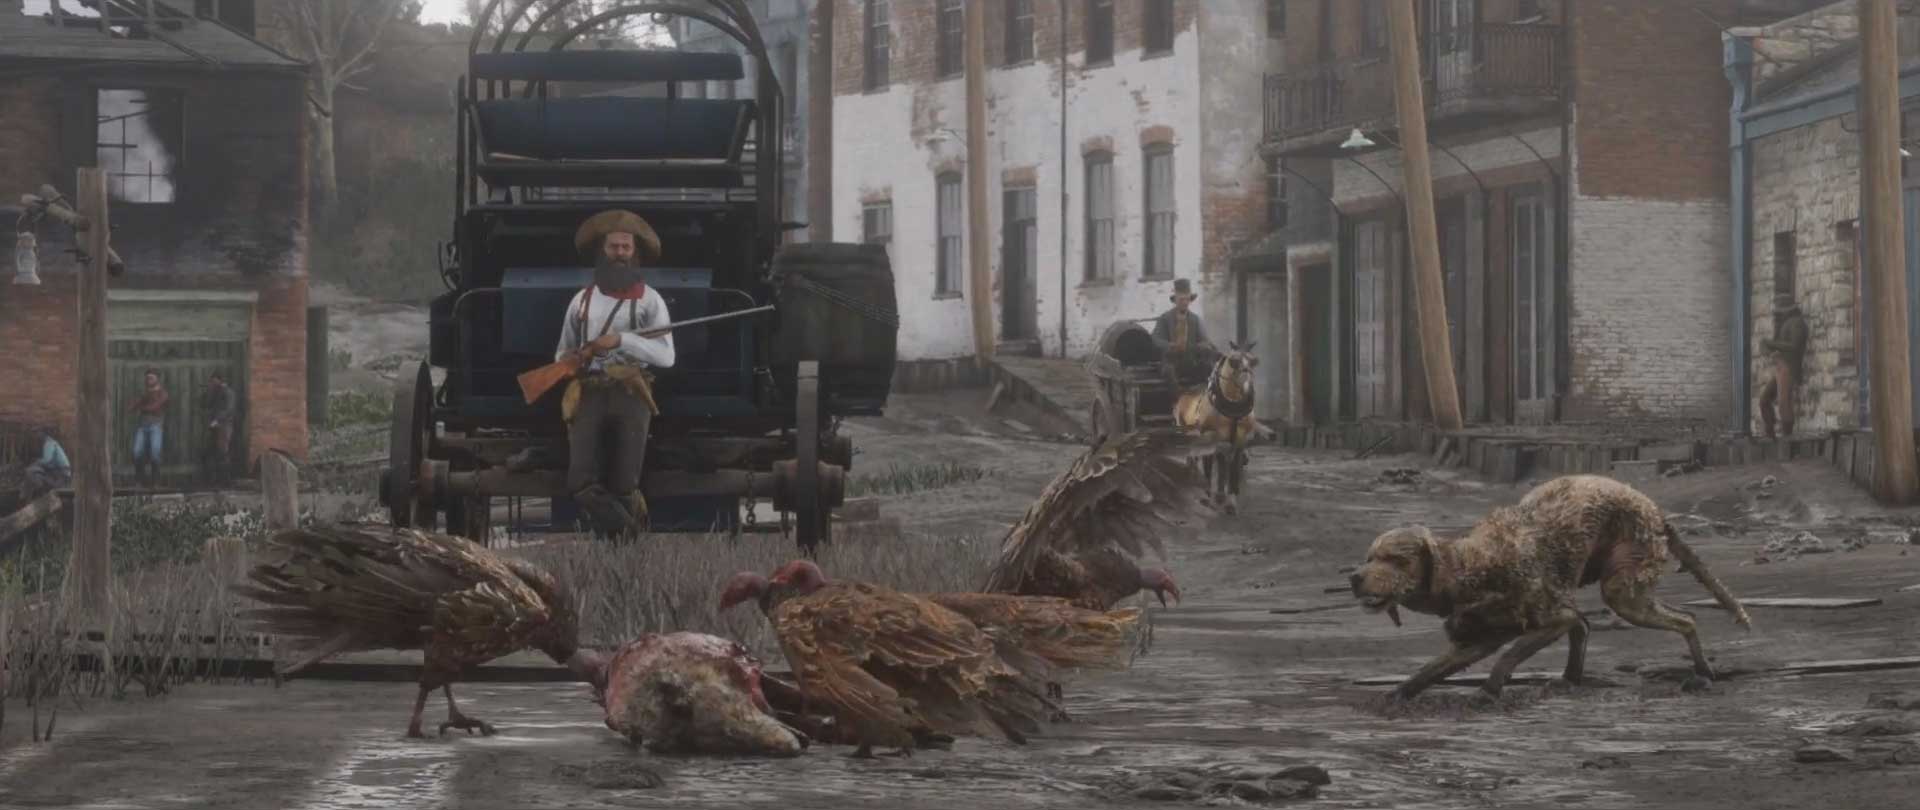 red_dead_redemption_2_trailer_screen_grab_town